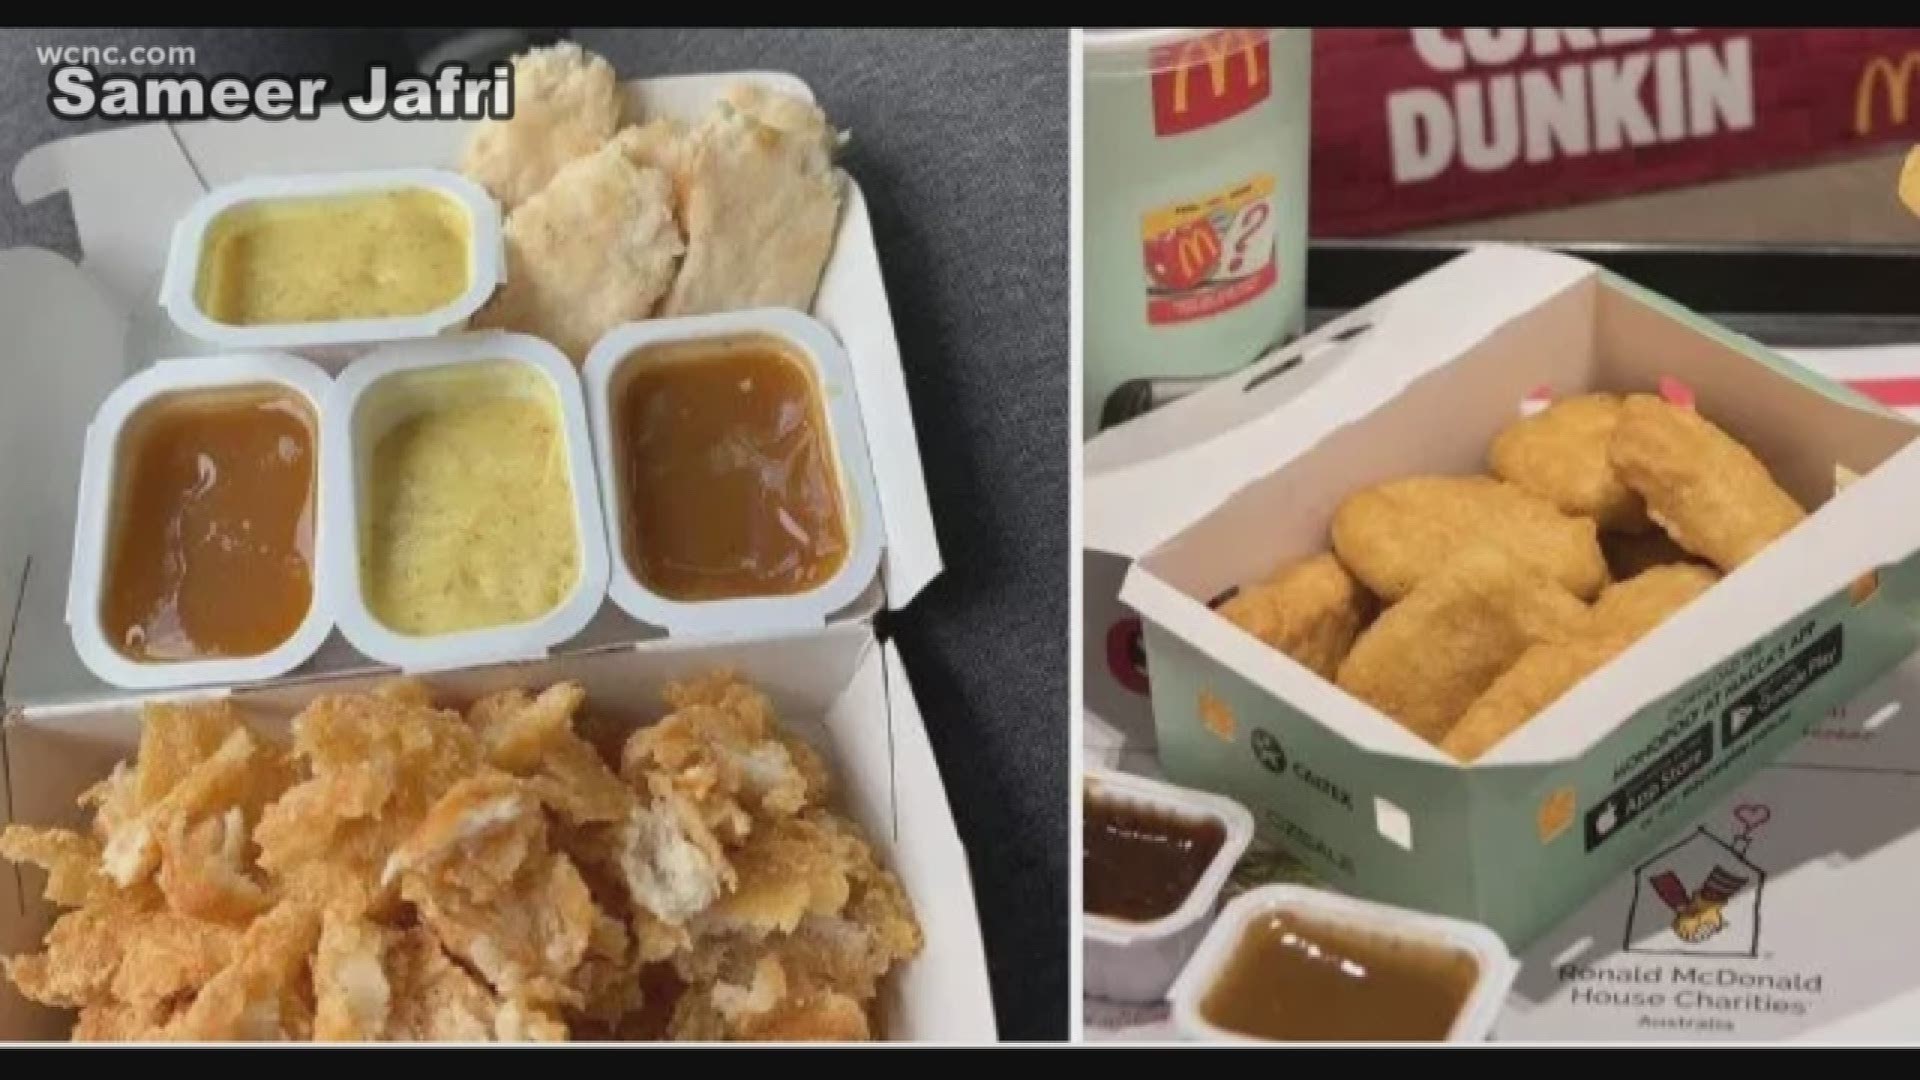 A Louisiana man went viral after his unorthodox way of eating chicken nuggets took social media by storm.